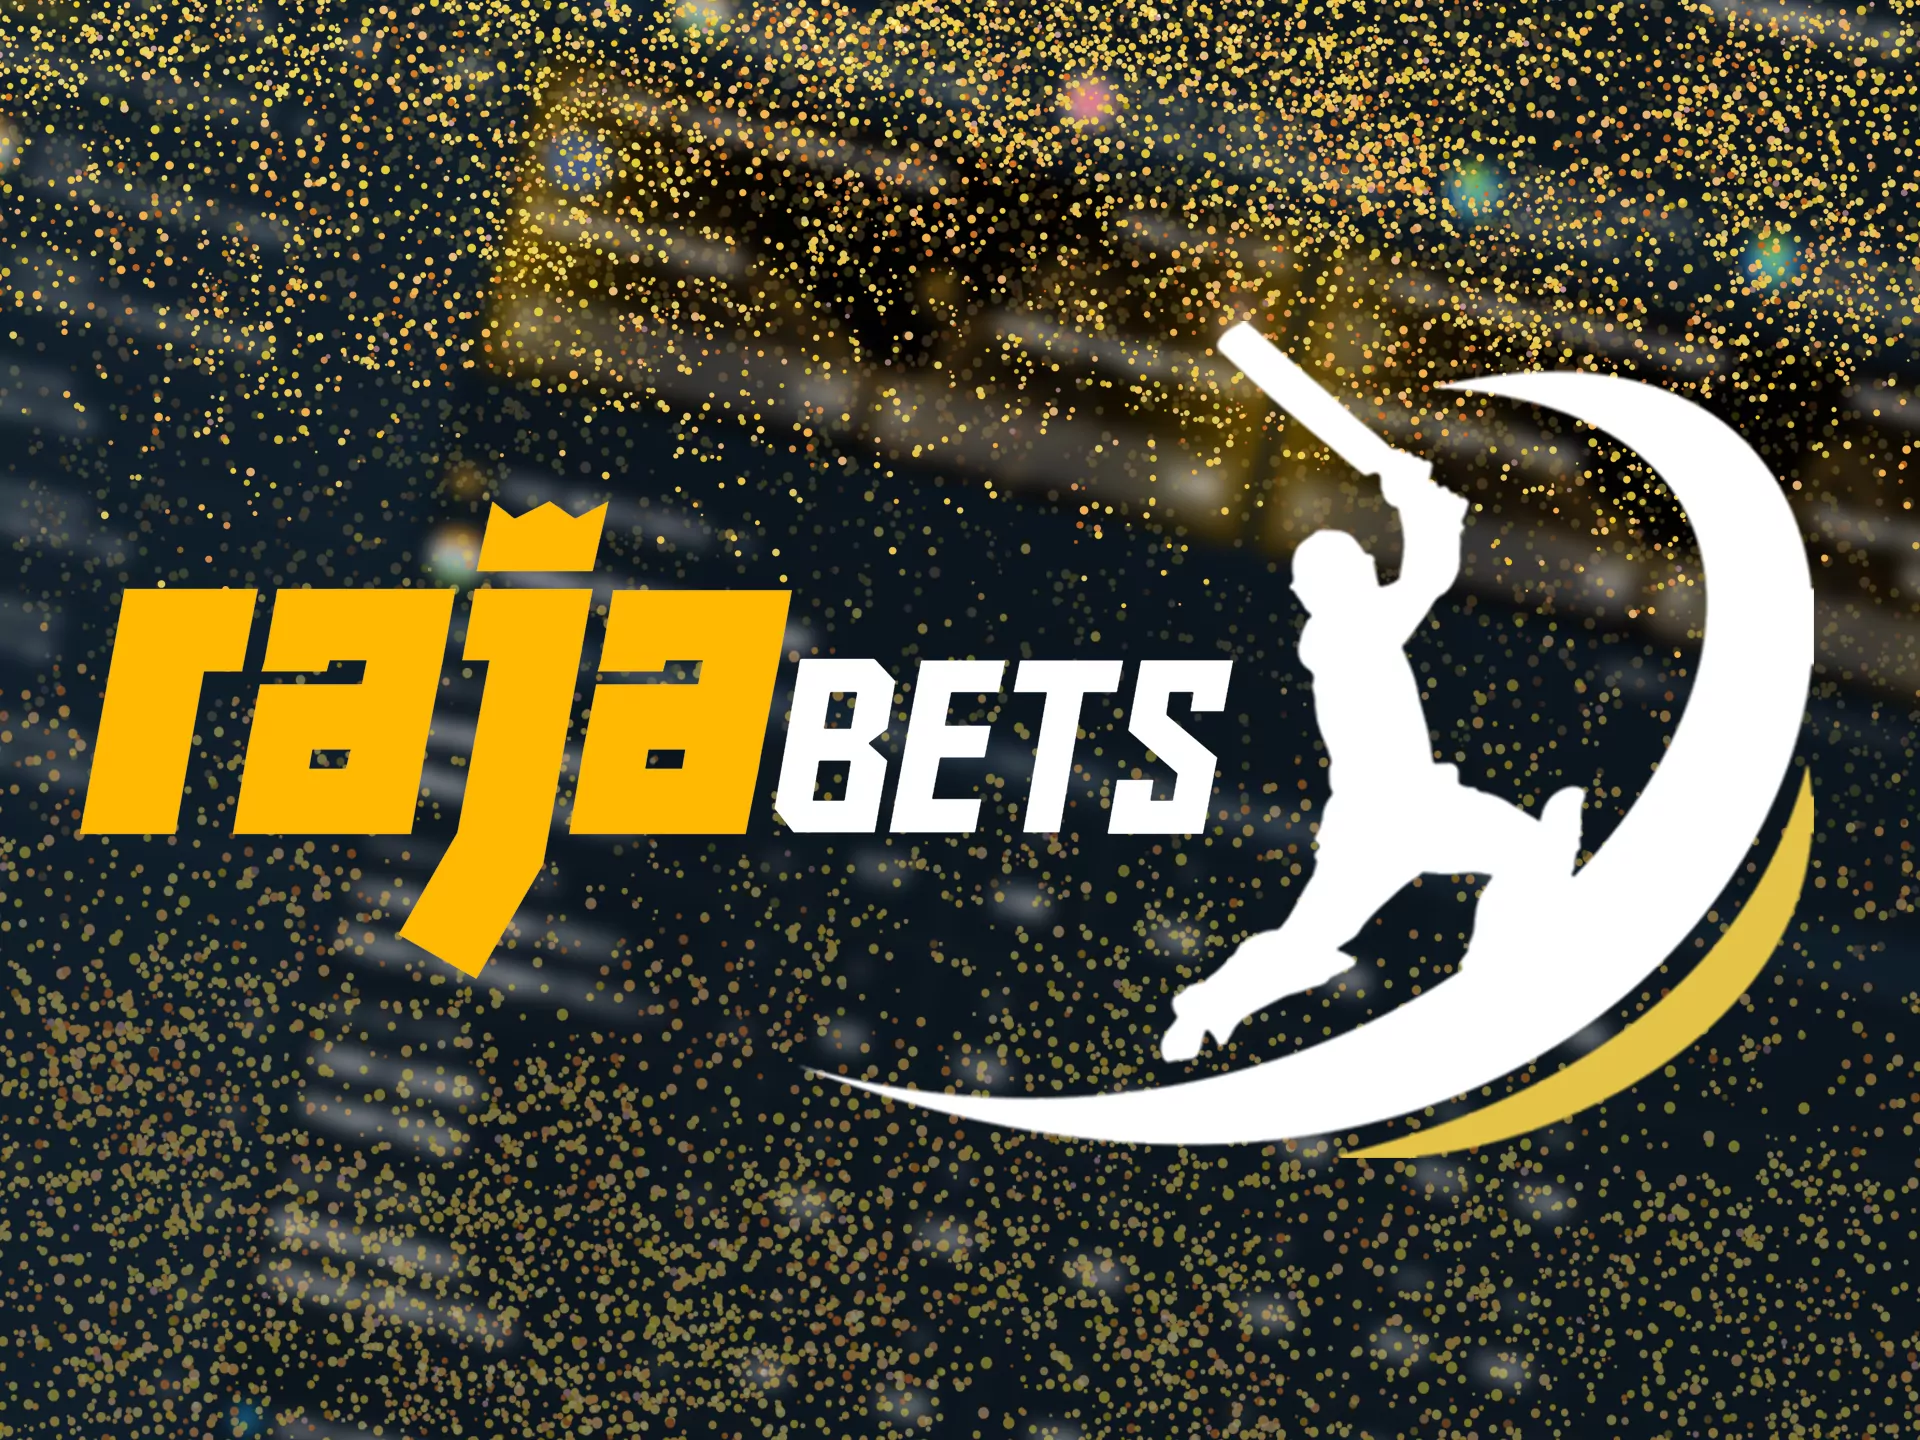 Bet on different cricket matches at Rajabets app.